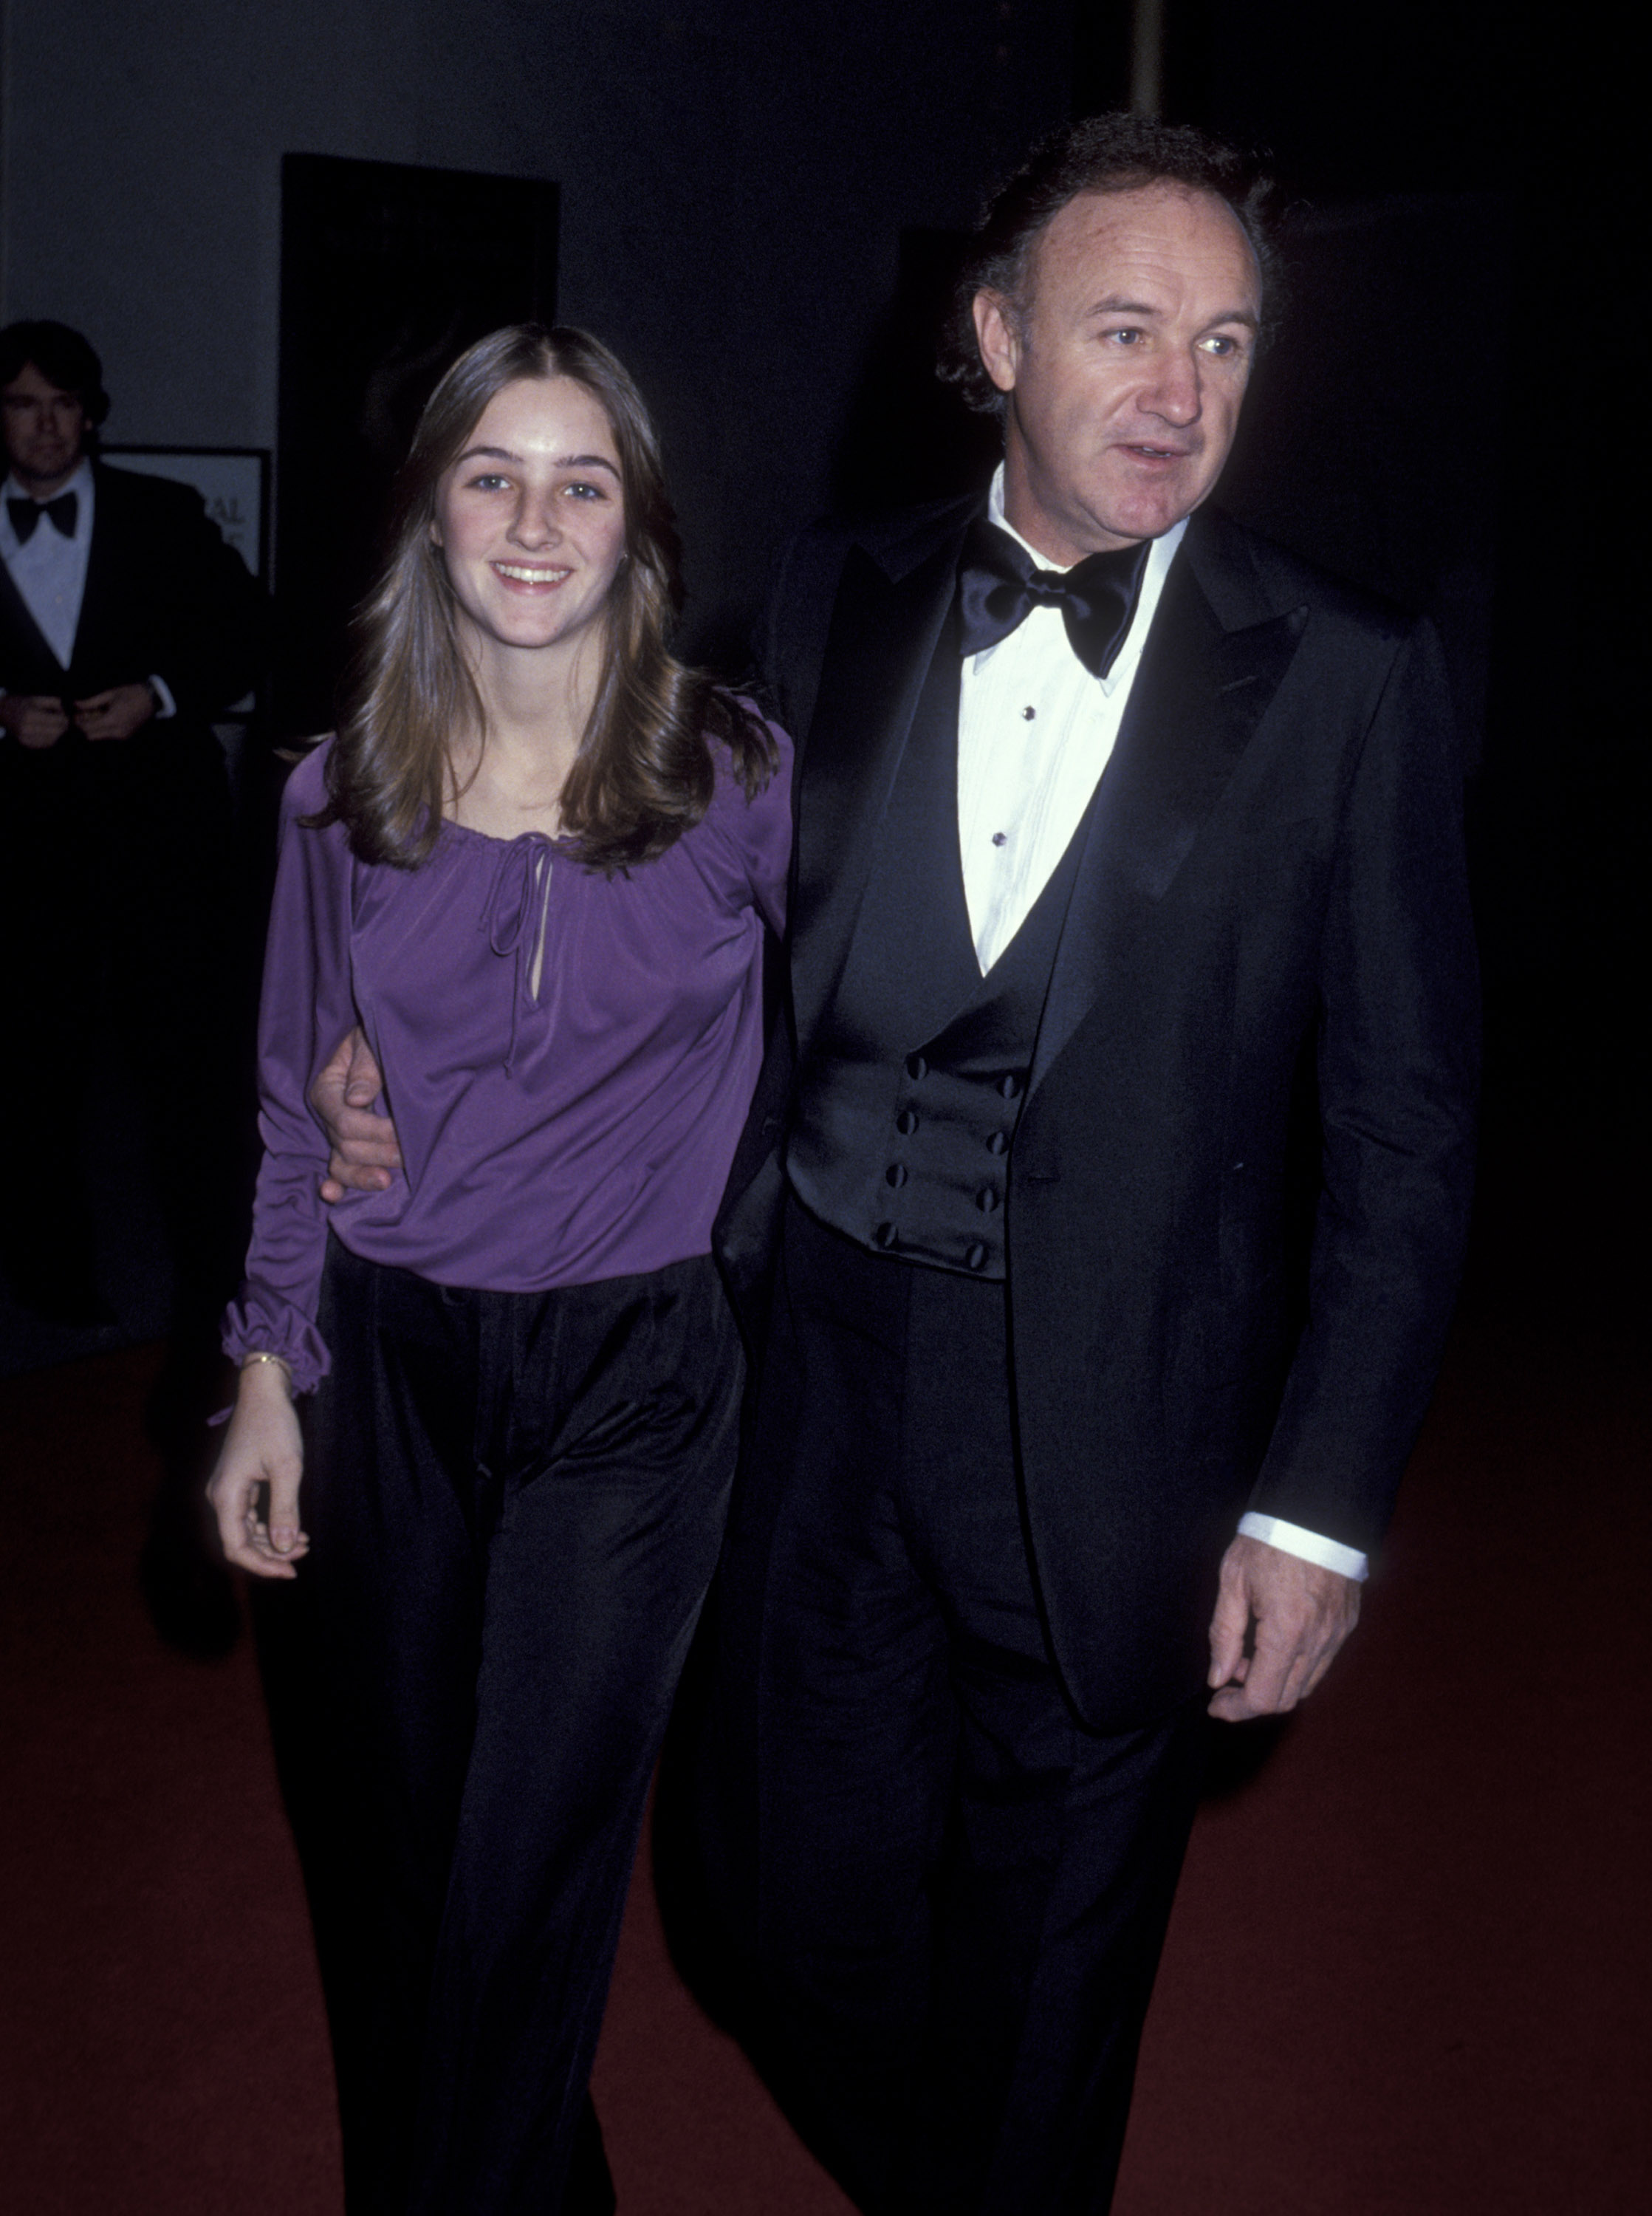 Actor Gene Hackman and daughter Elizabeth Hackman attend the screening of Superman on December, 10, 1978 at the Kennedy Center in Washington, D.C.